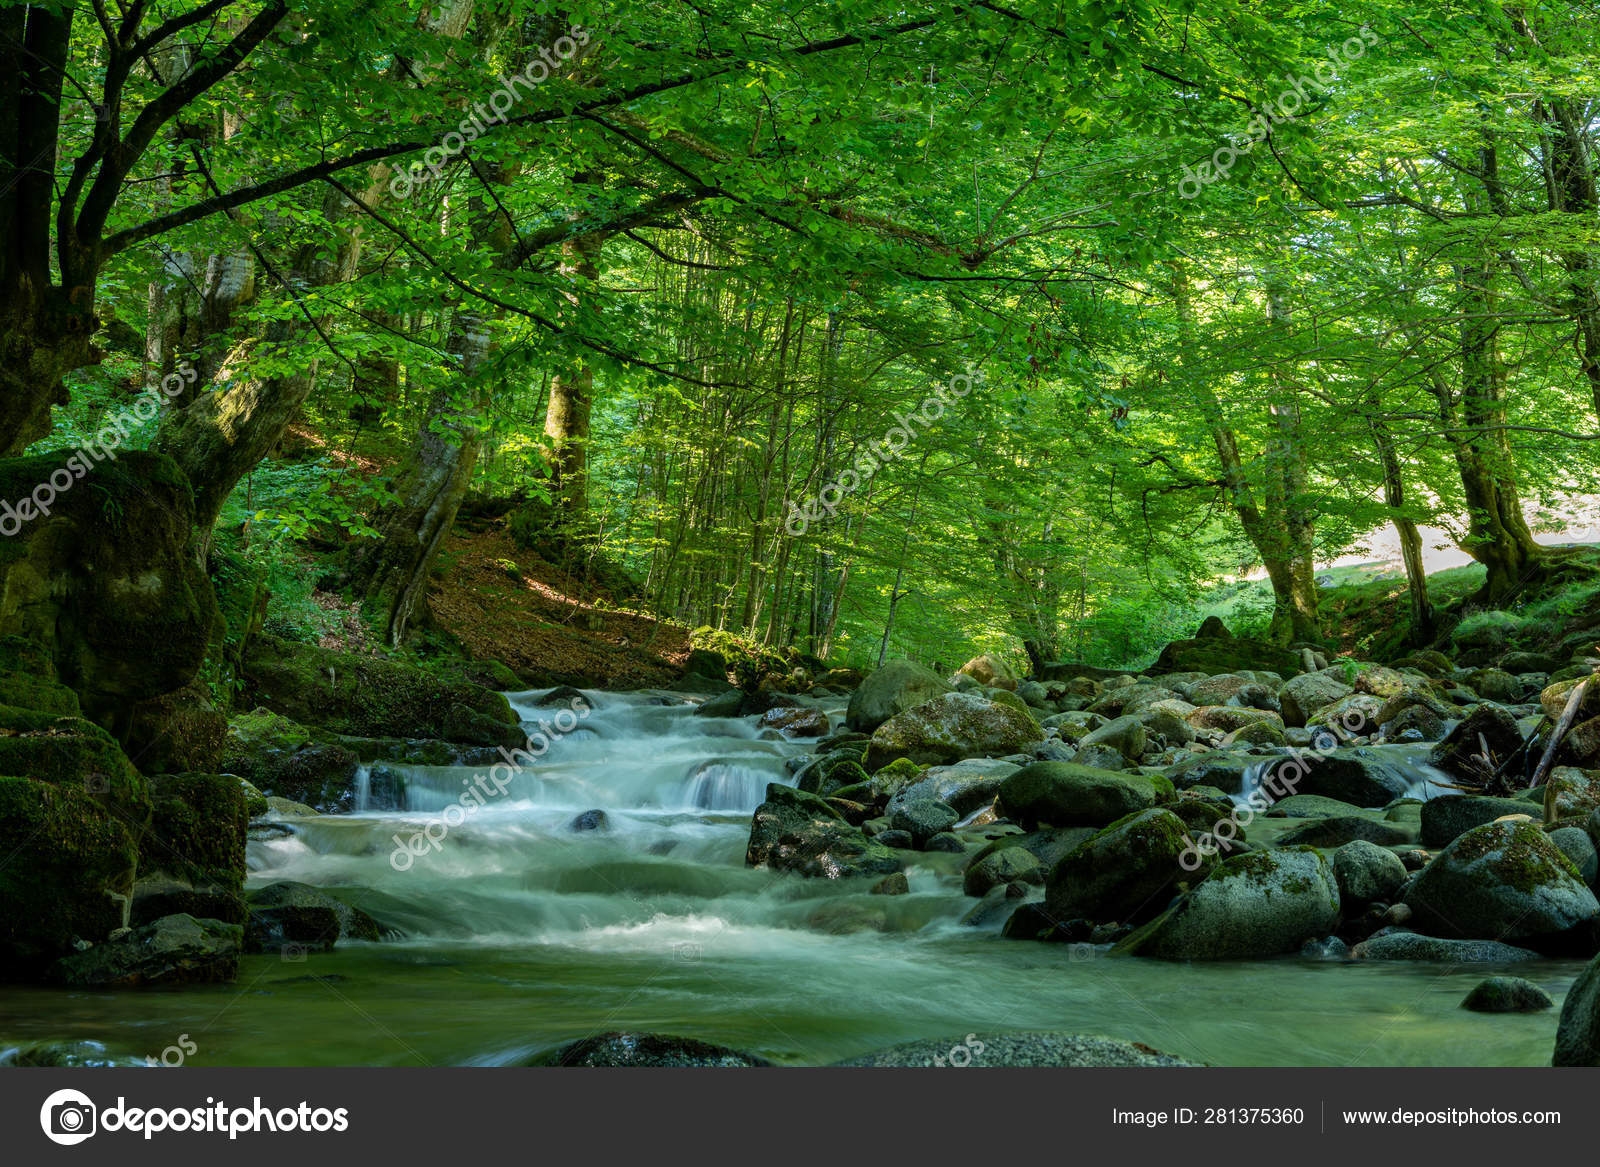 Forest river Stock Photos, Royalty Free Forest river Images